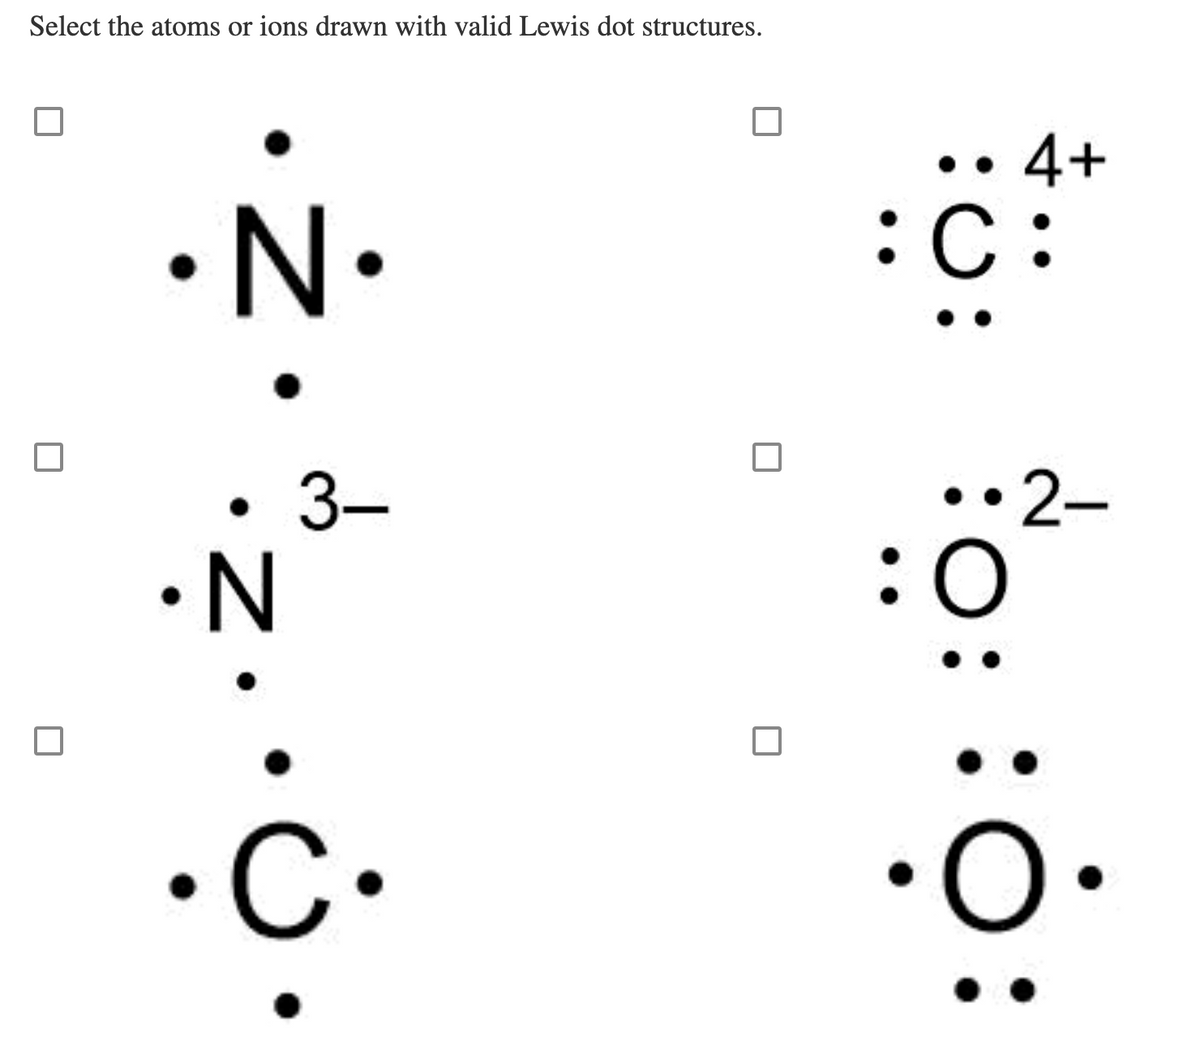 Select the atoms or ions drawn with valid Lewis dot structures.
4+
N•
:C:
3-
2-
•N
O:
